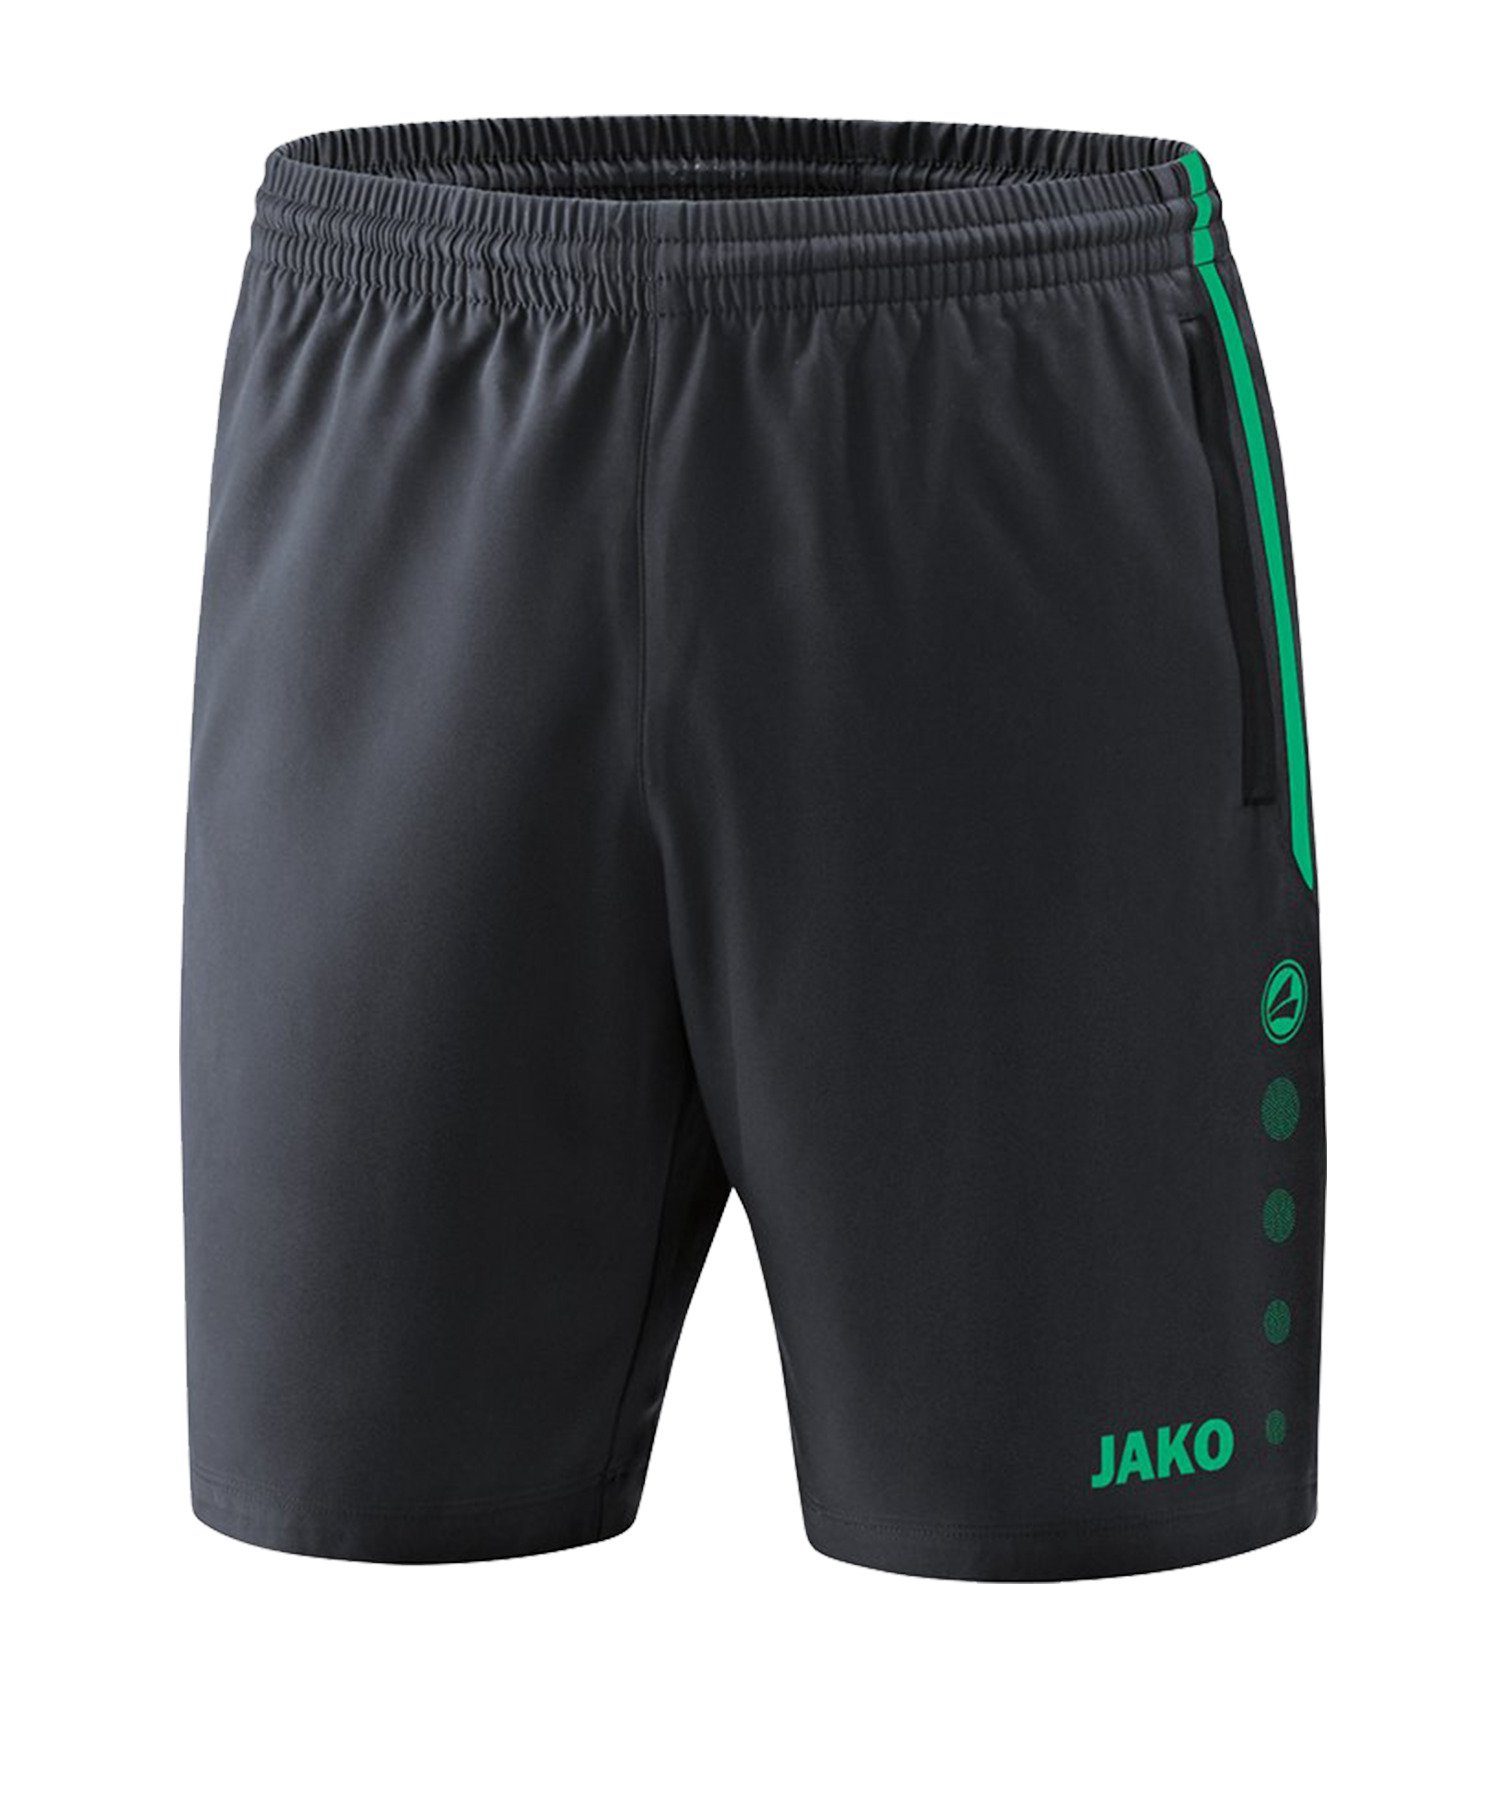 Jako Sporthose Competition 2.0 Short Grautuerkis